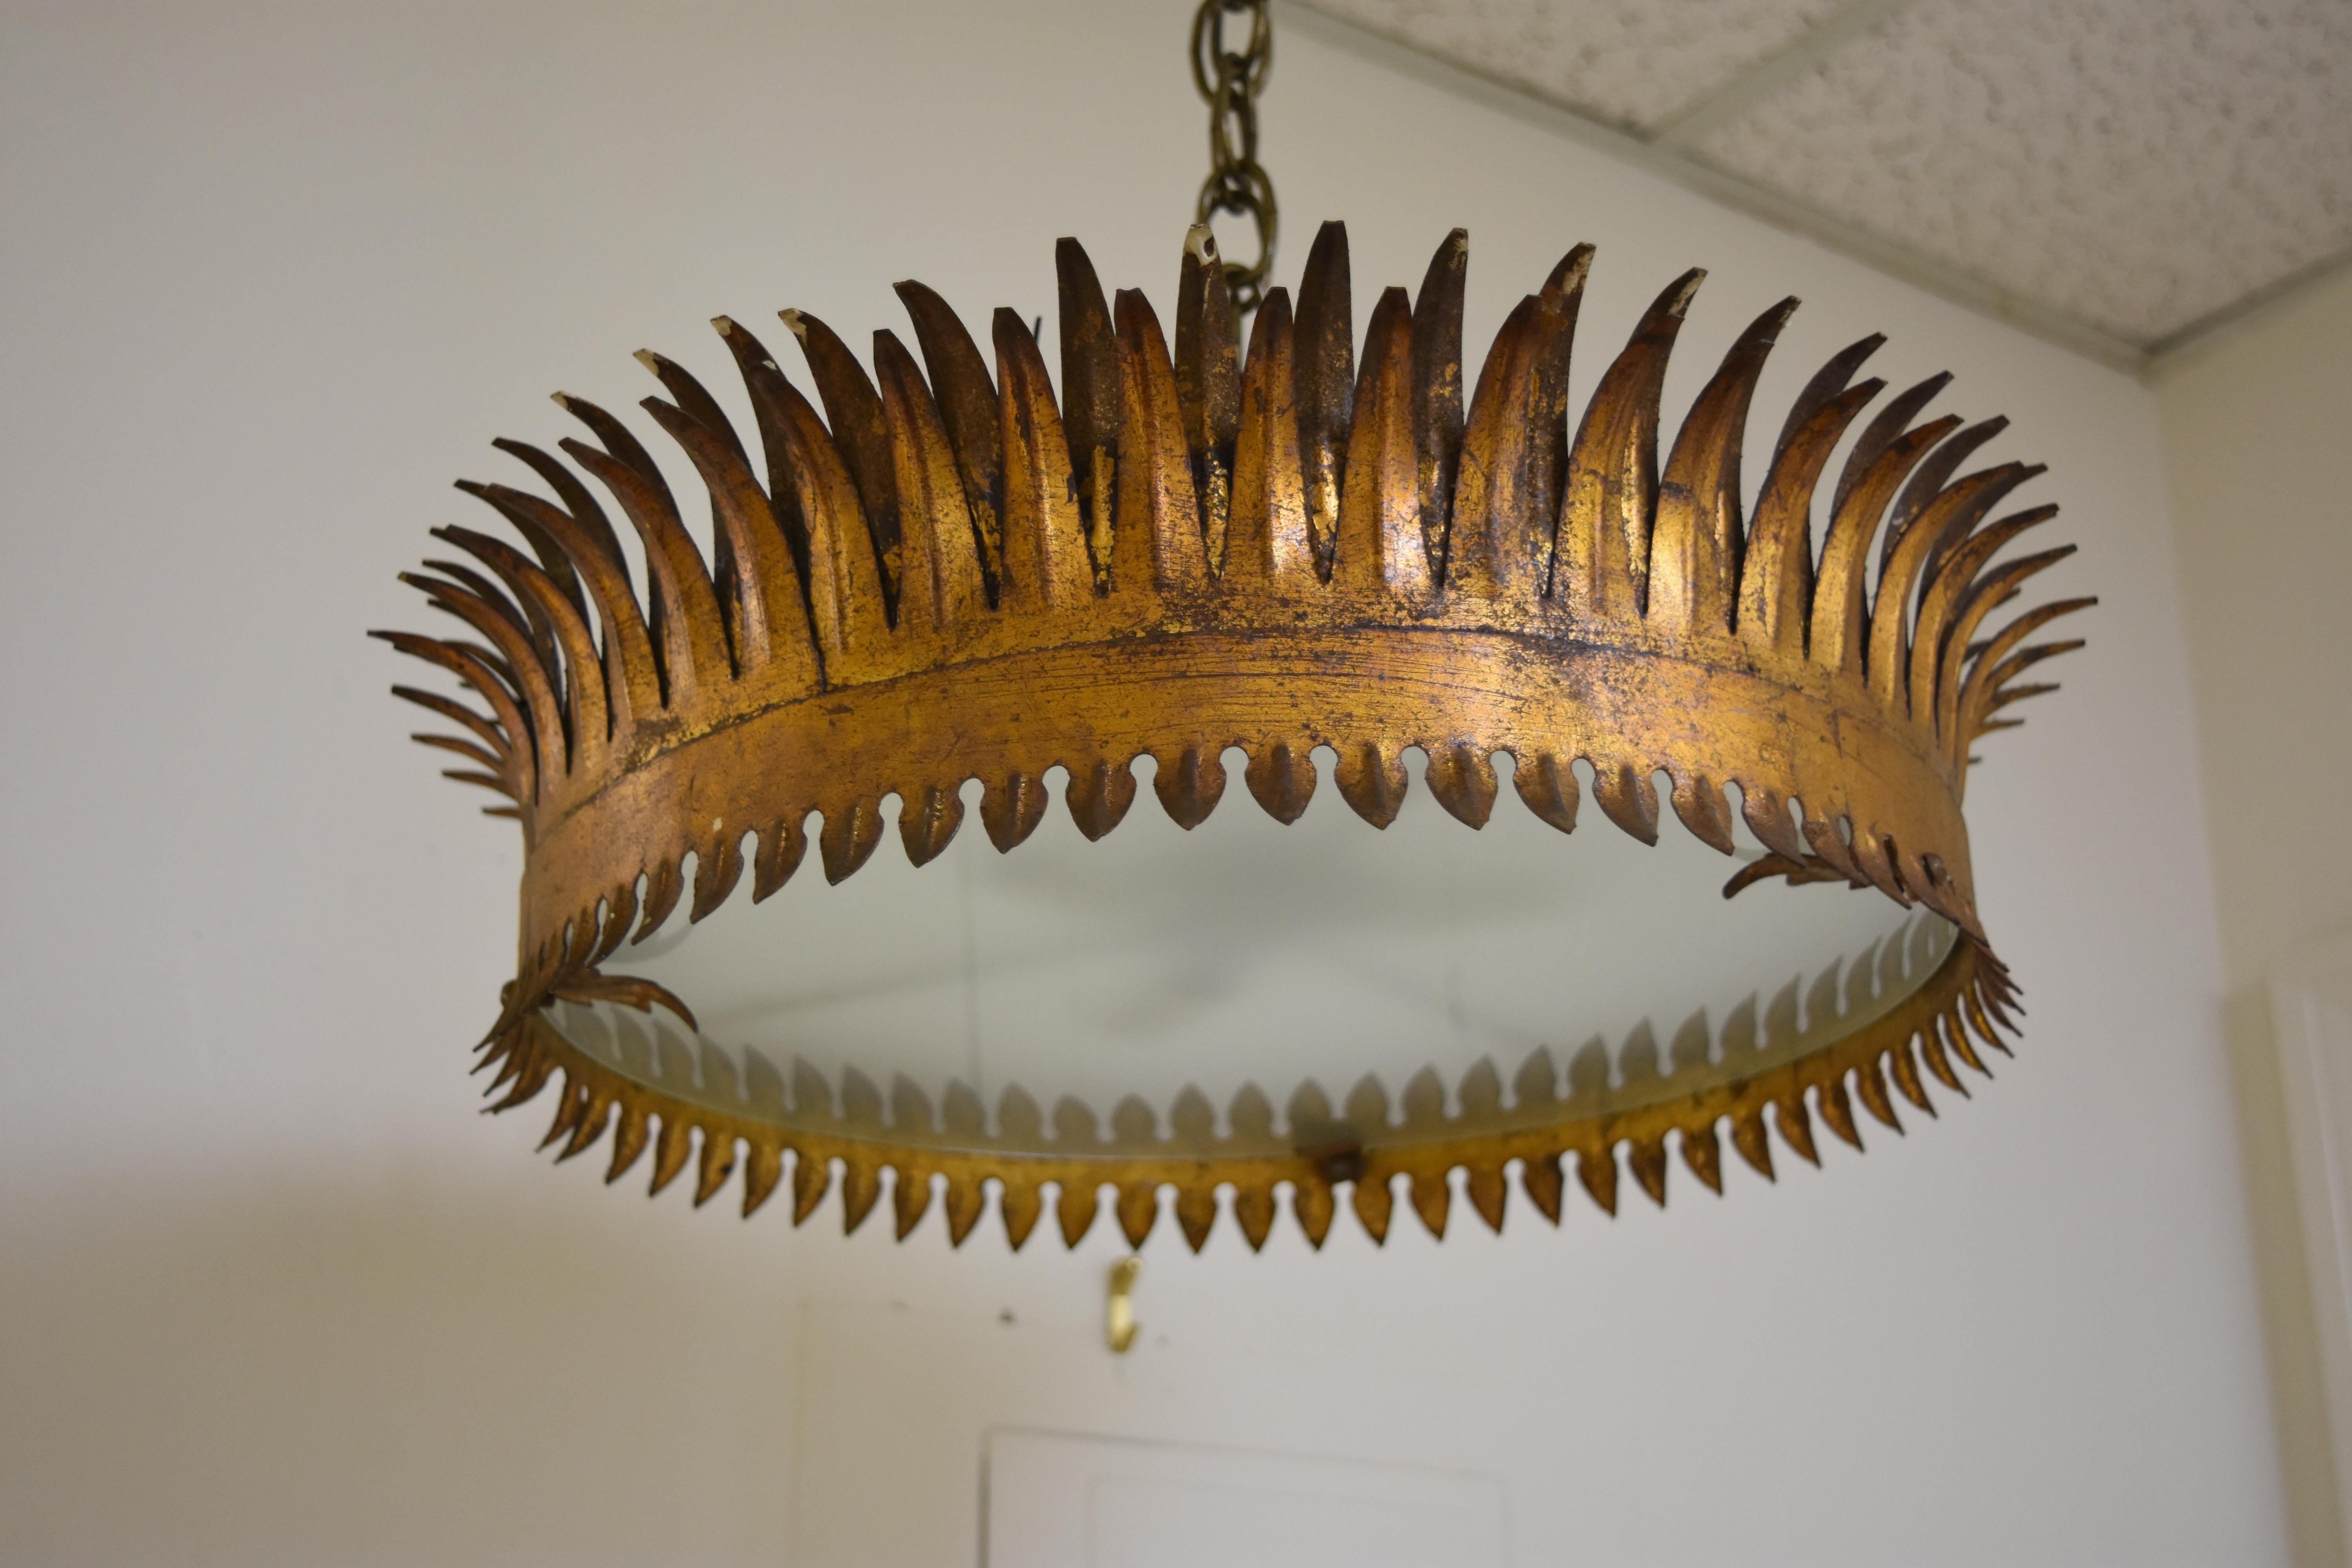 This early 20th century light fixture is a crown shape with three lights. It has been newly rewired for American use. The light is diffused shining through a piece of frosted glass held in place by three small gold metal leaves. Two of the leaves